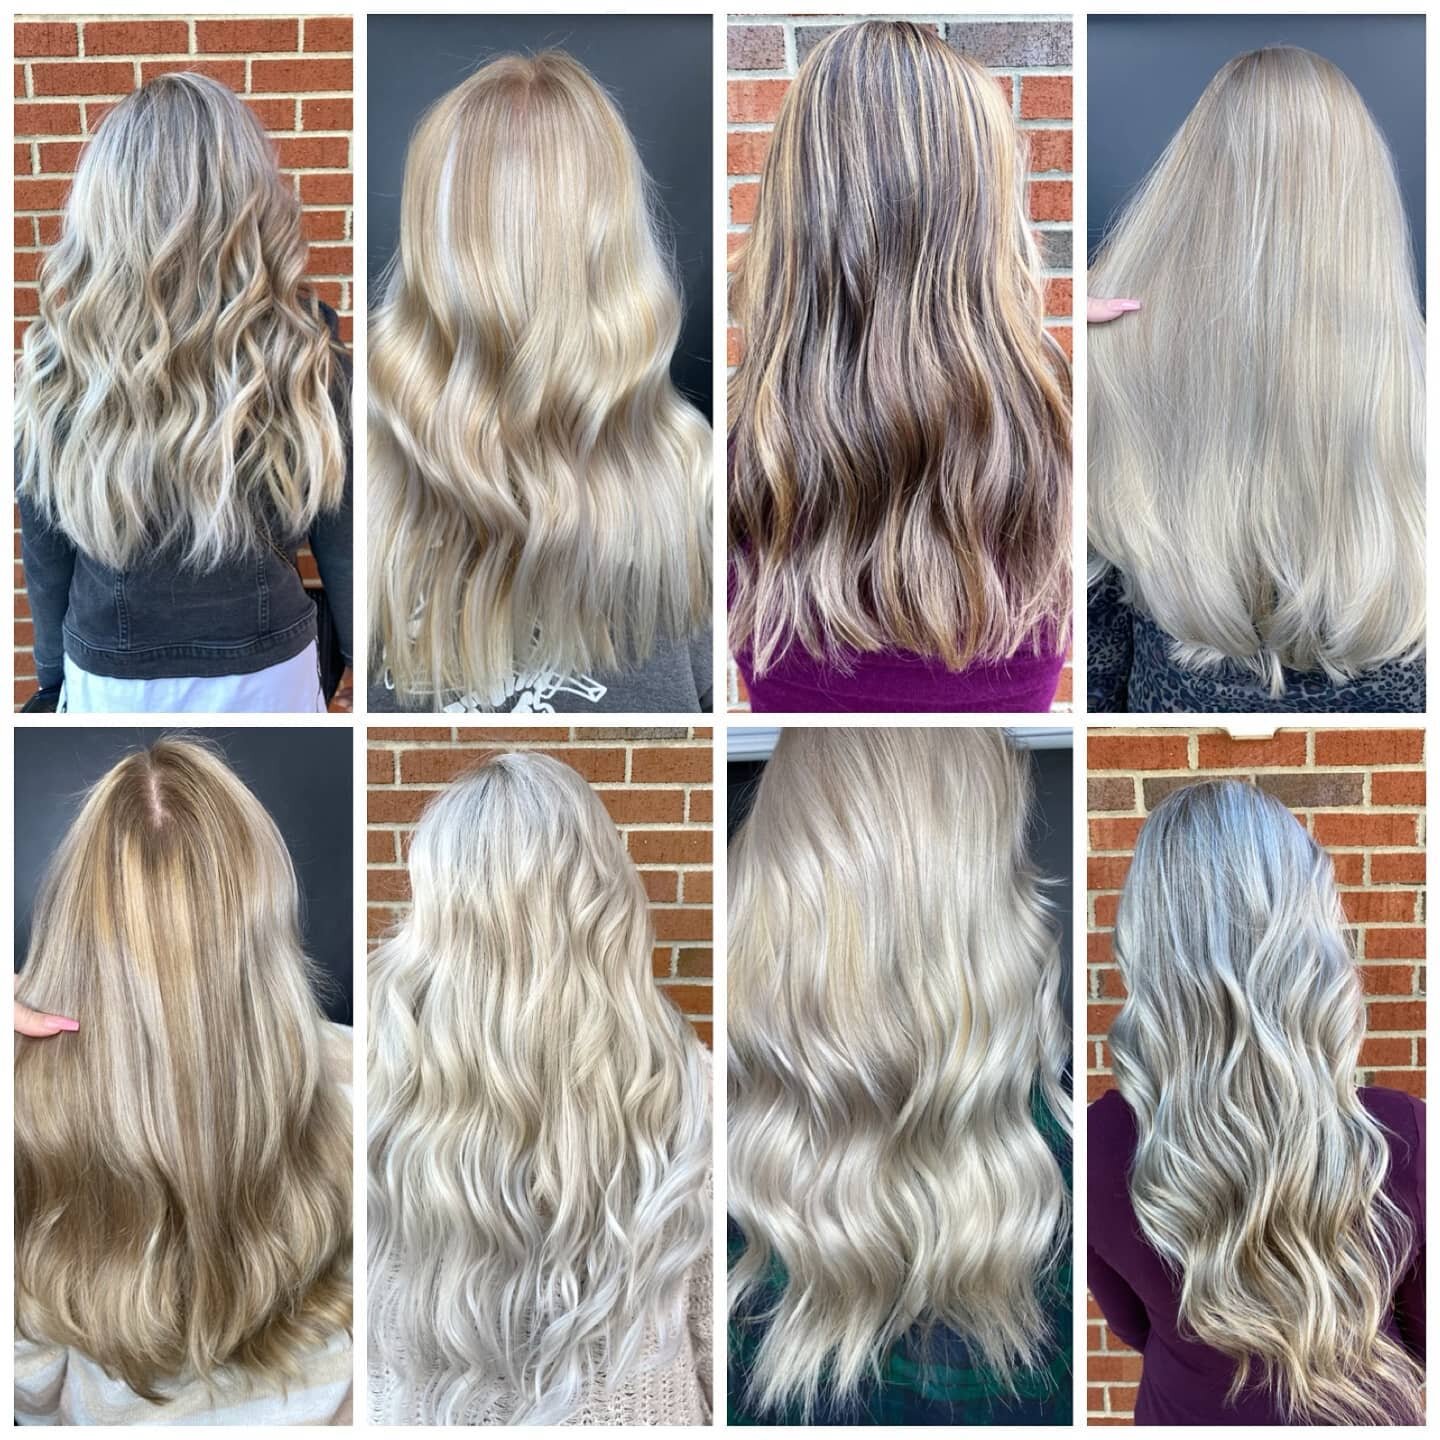 Needing a blonde refresh? A pop of something new? Cassie has availability next week! @hairbycassiejo

DM or call for an appointment!
.
.
.
#hairbycassiejo #raleigh #localsalon #raleighsalon #raleighhairstylist #raleighhair #raleighblondes #raleighbal